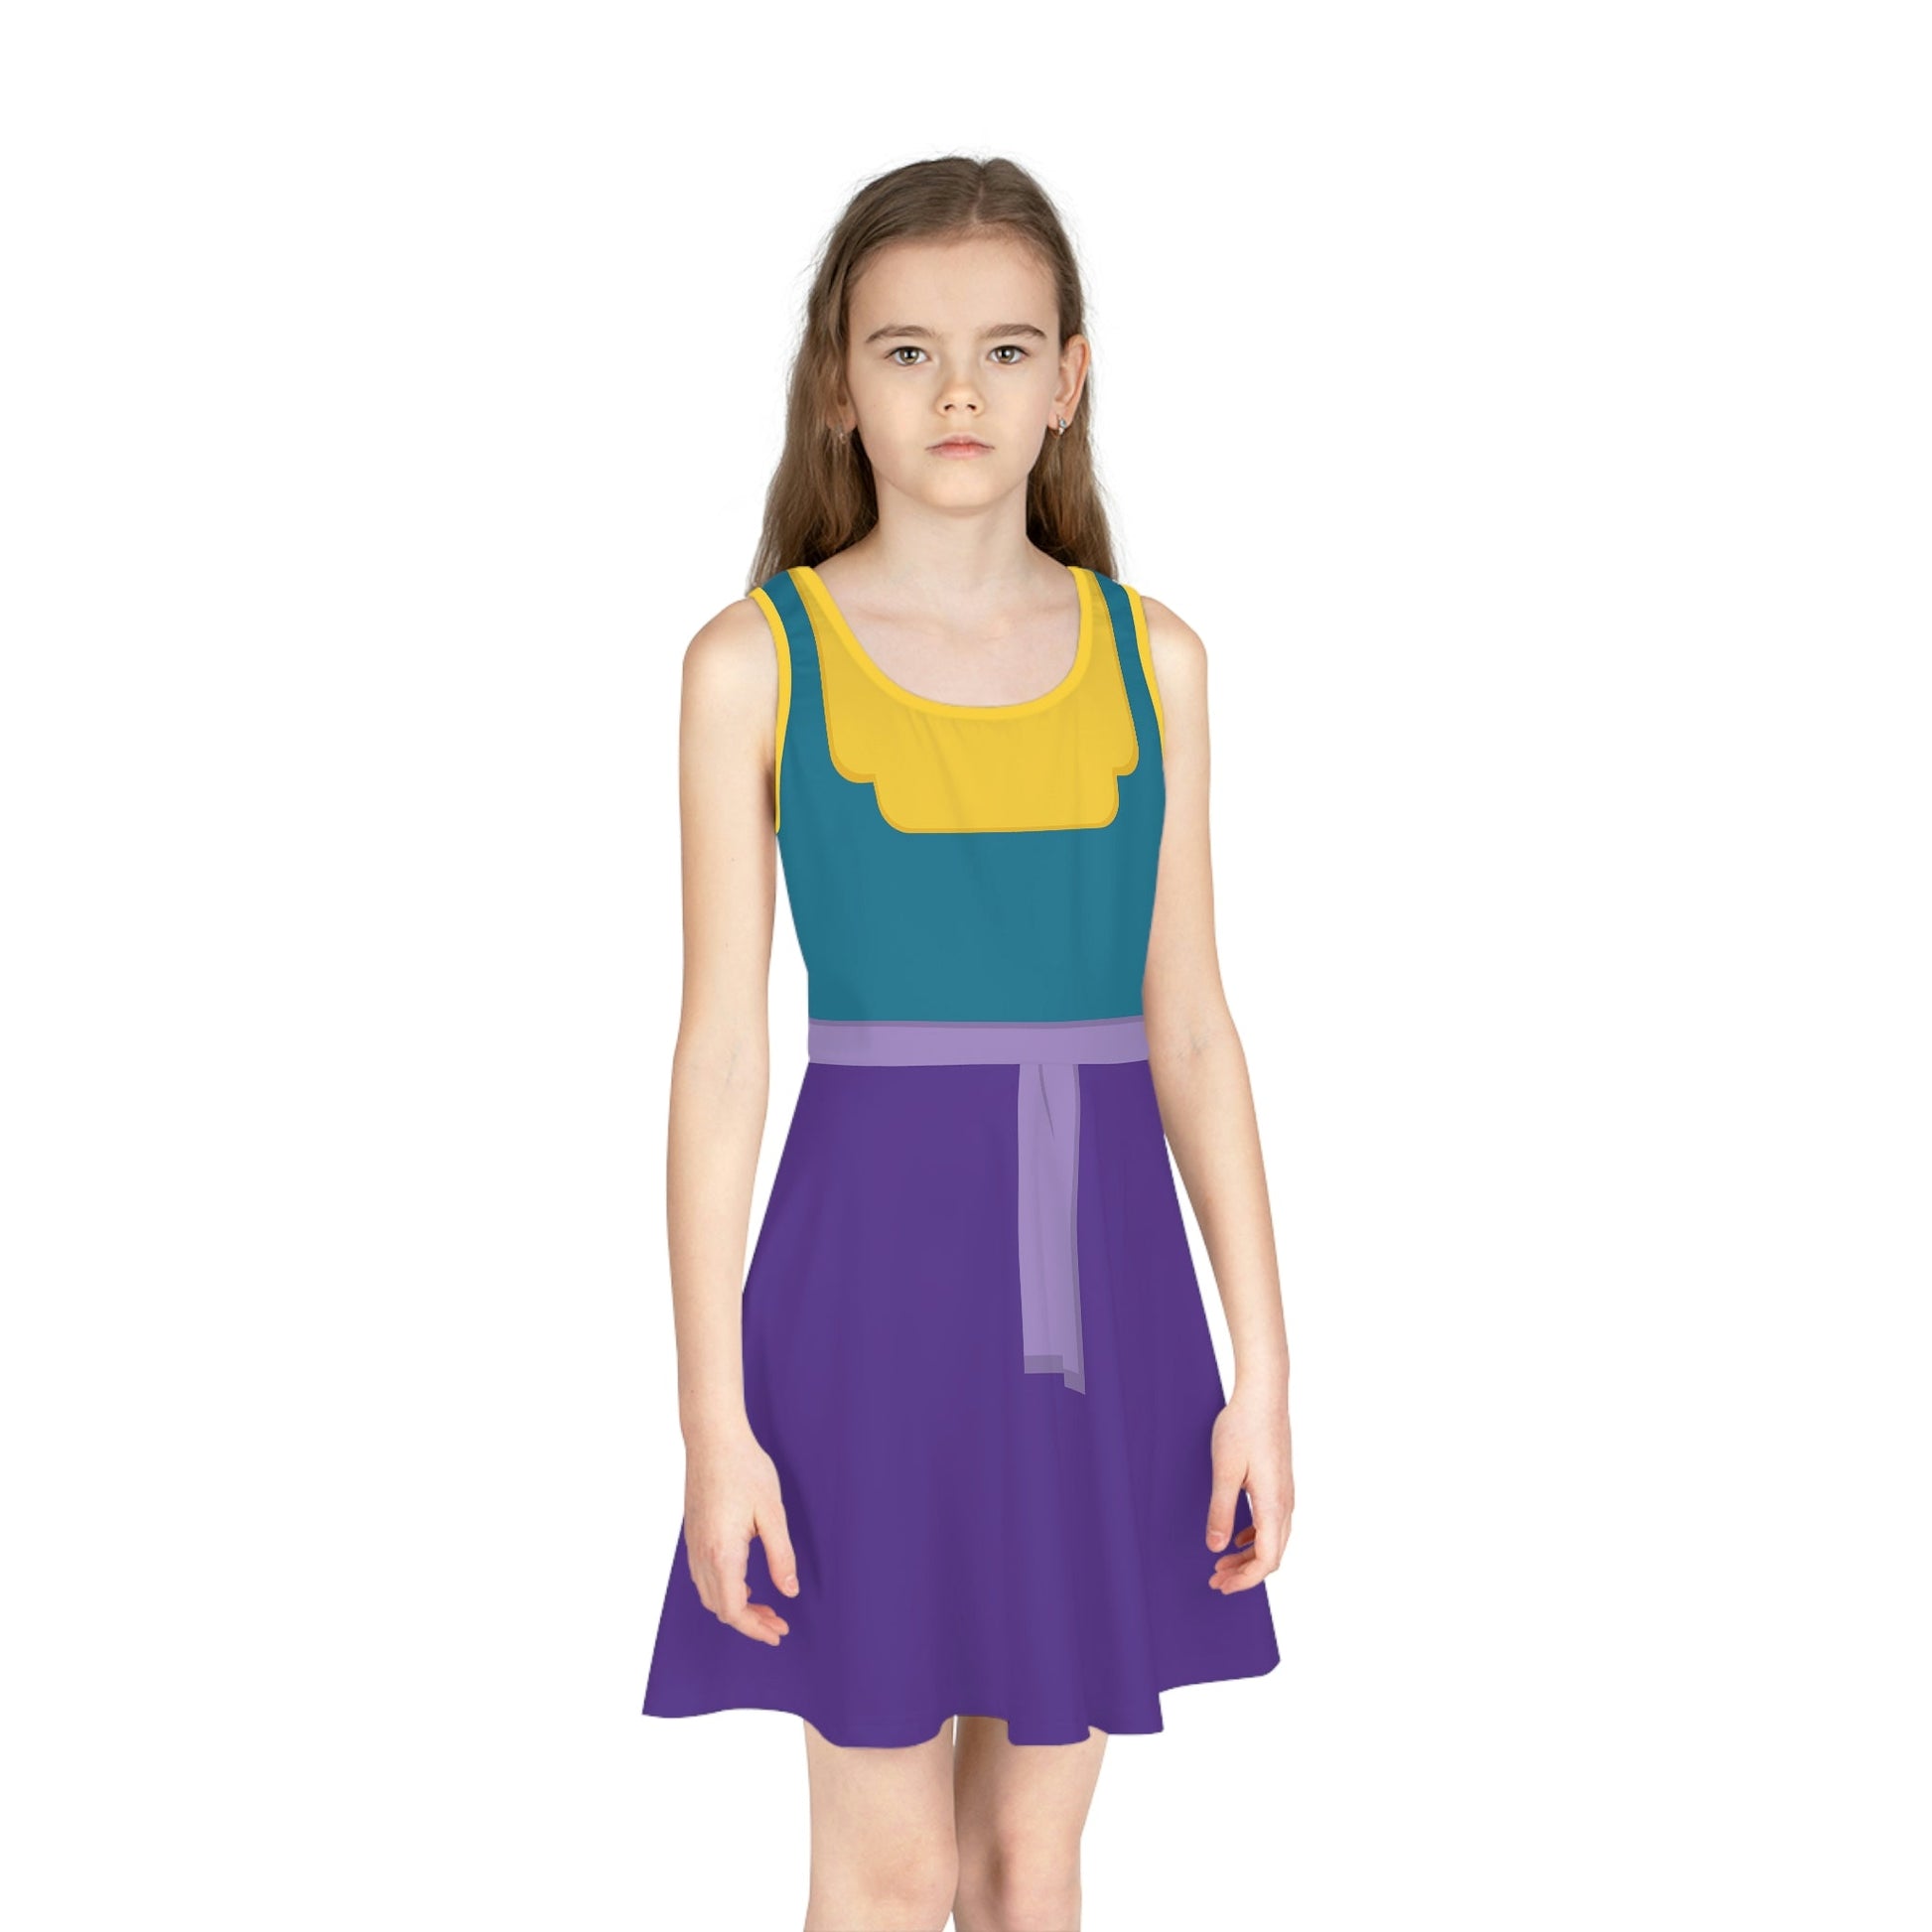 The Kronk Girls' Sleeveless Sundress All Over PrintAOPAOP Clothing#tag4##tag5##tag6#